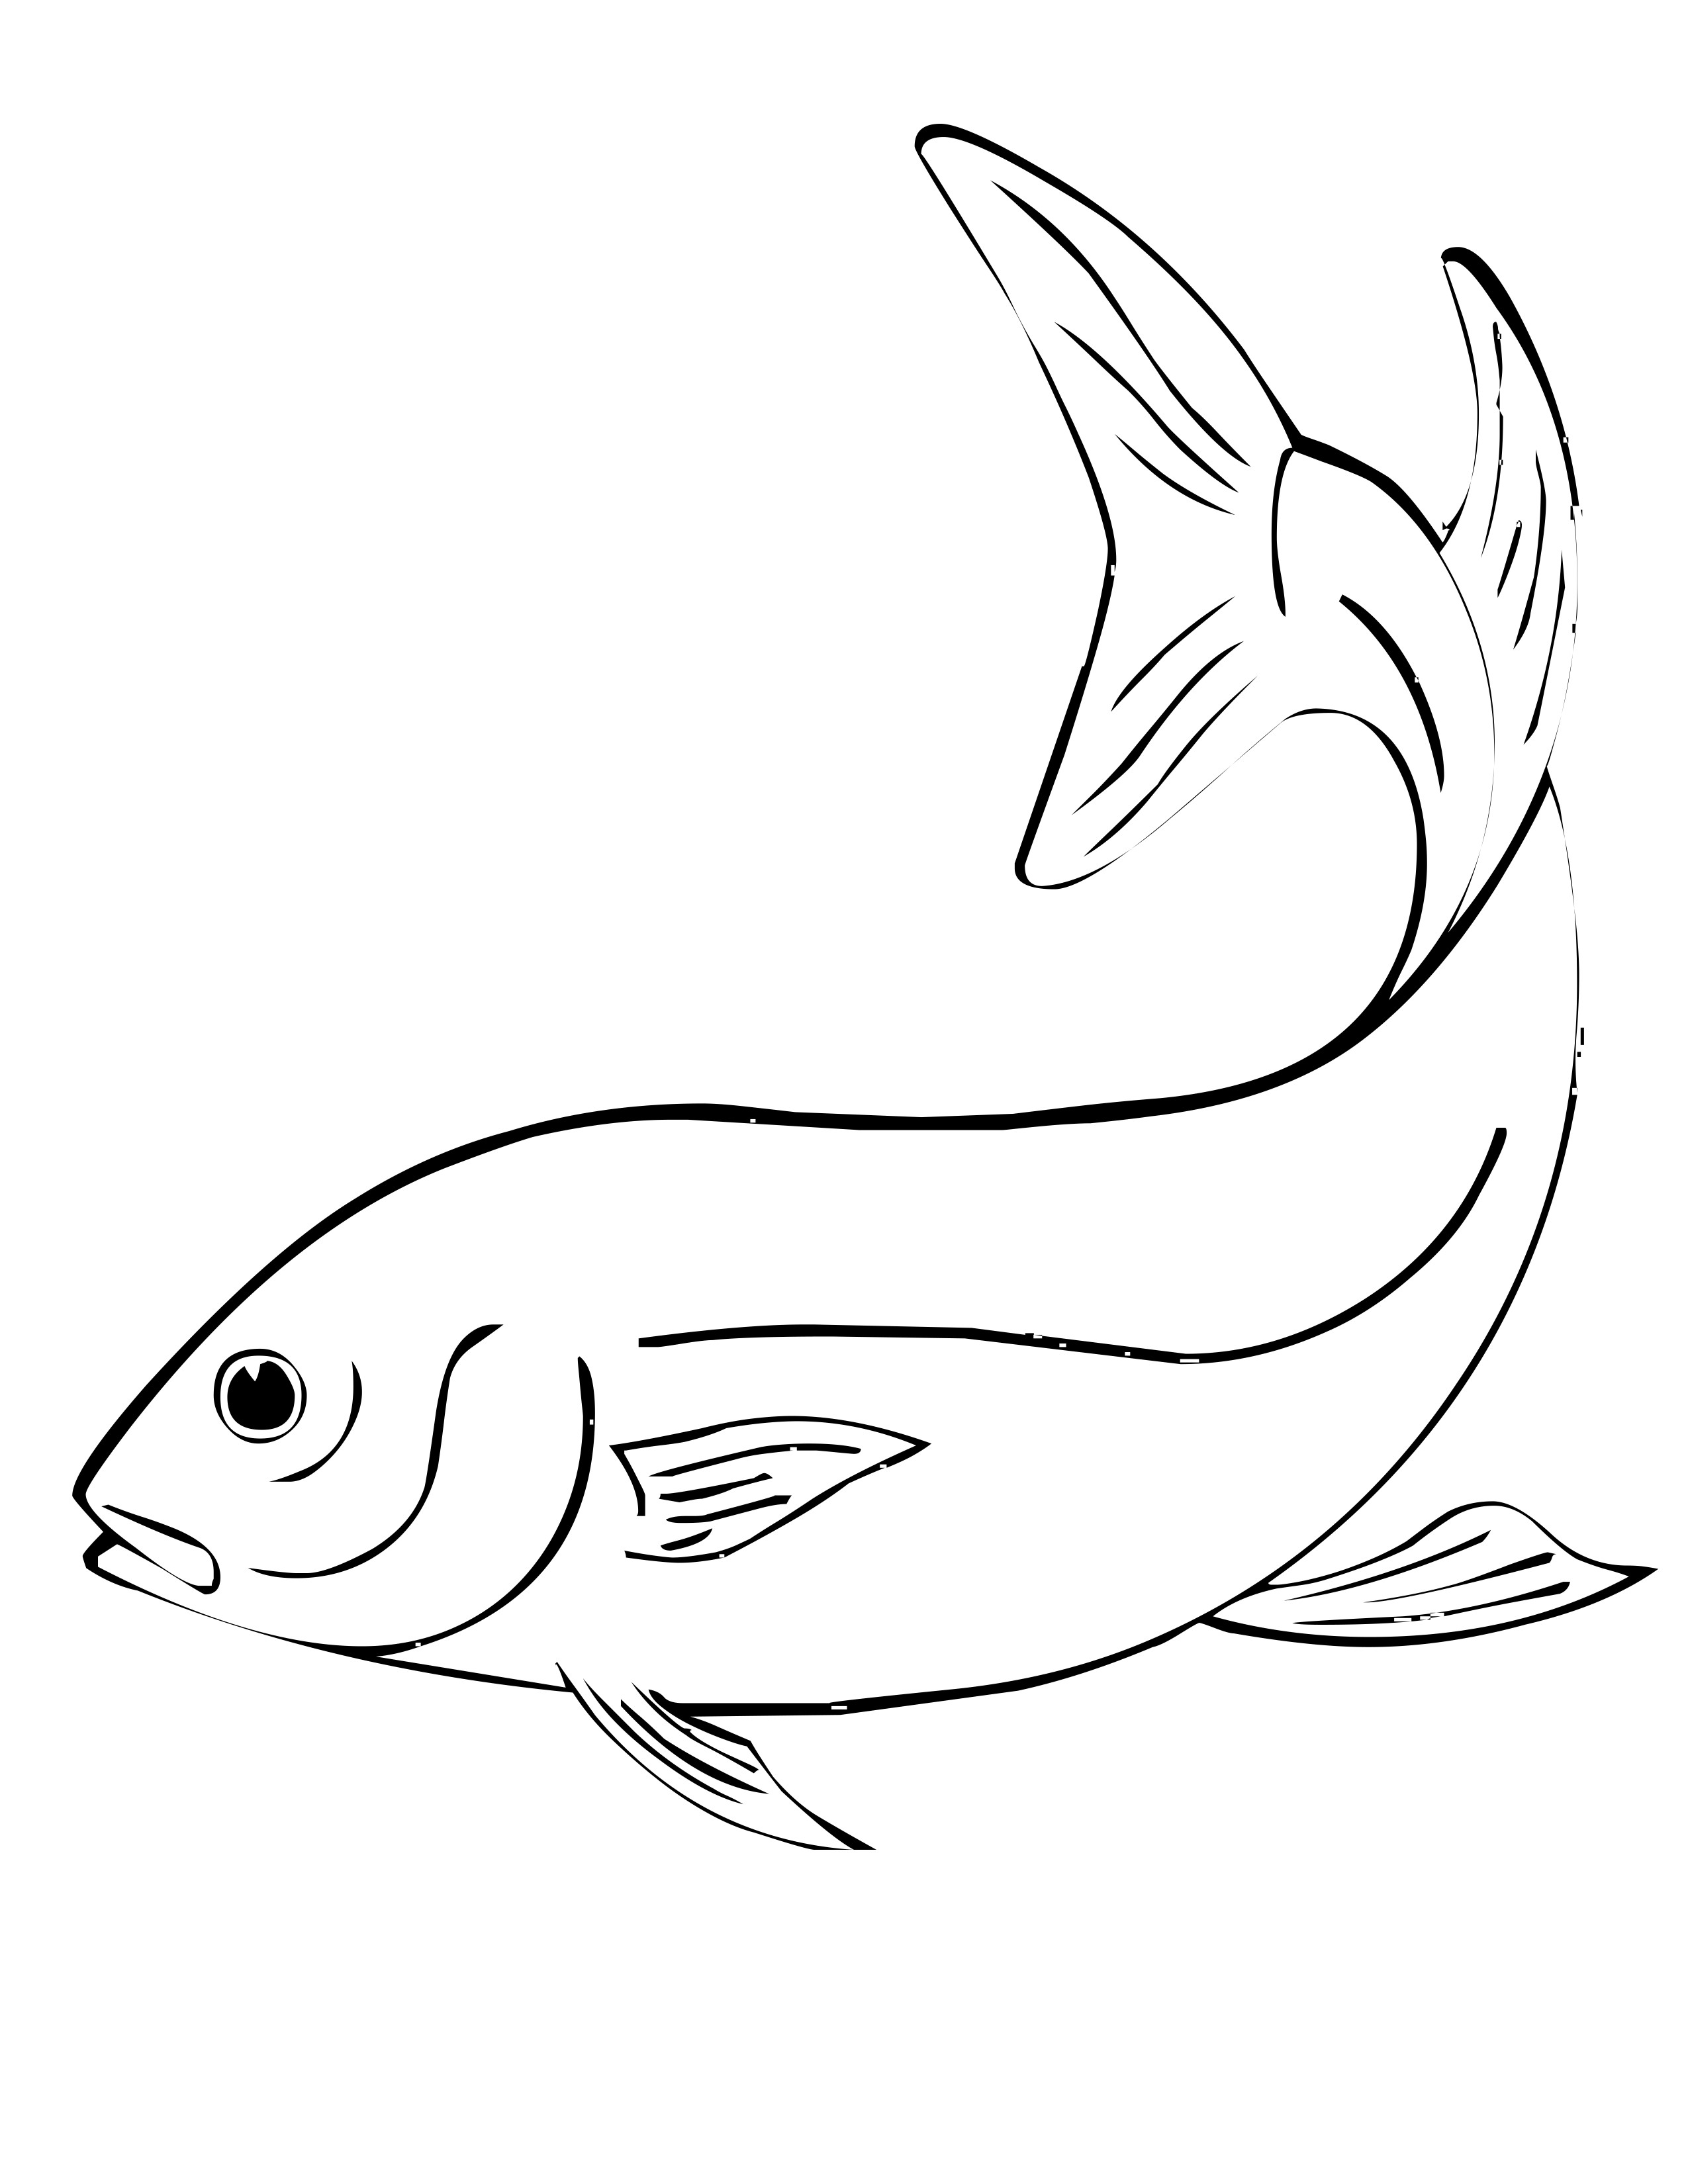 Free Printable Fish Coloring Pages For Kids HD Wallpapers Download Free Images Wallpaper [wallpaper896.blogspot.com]